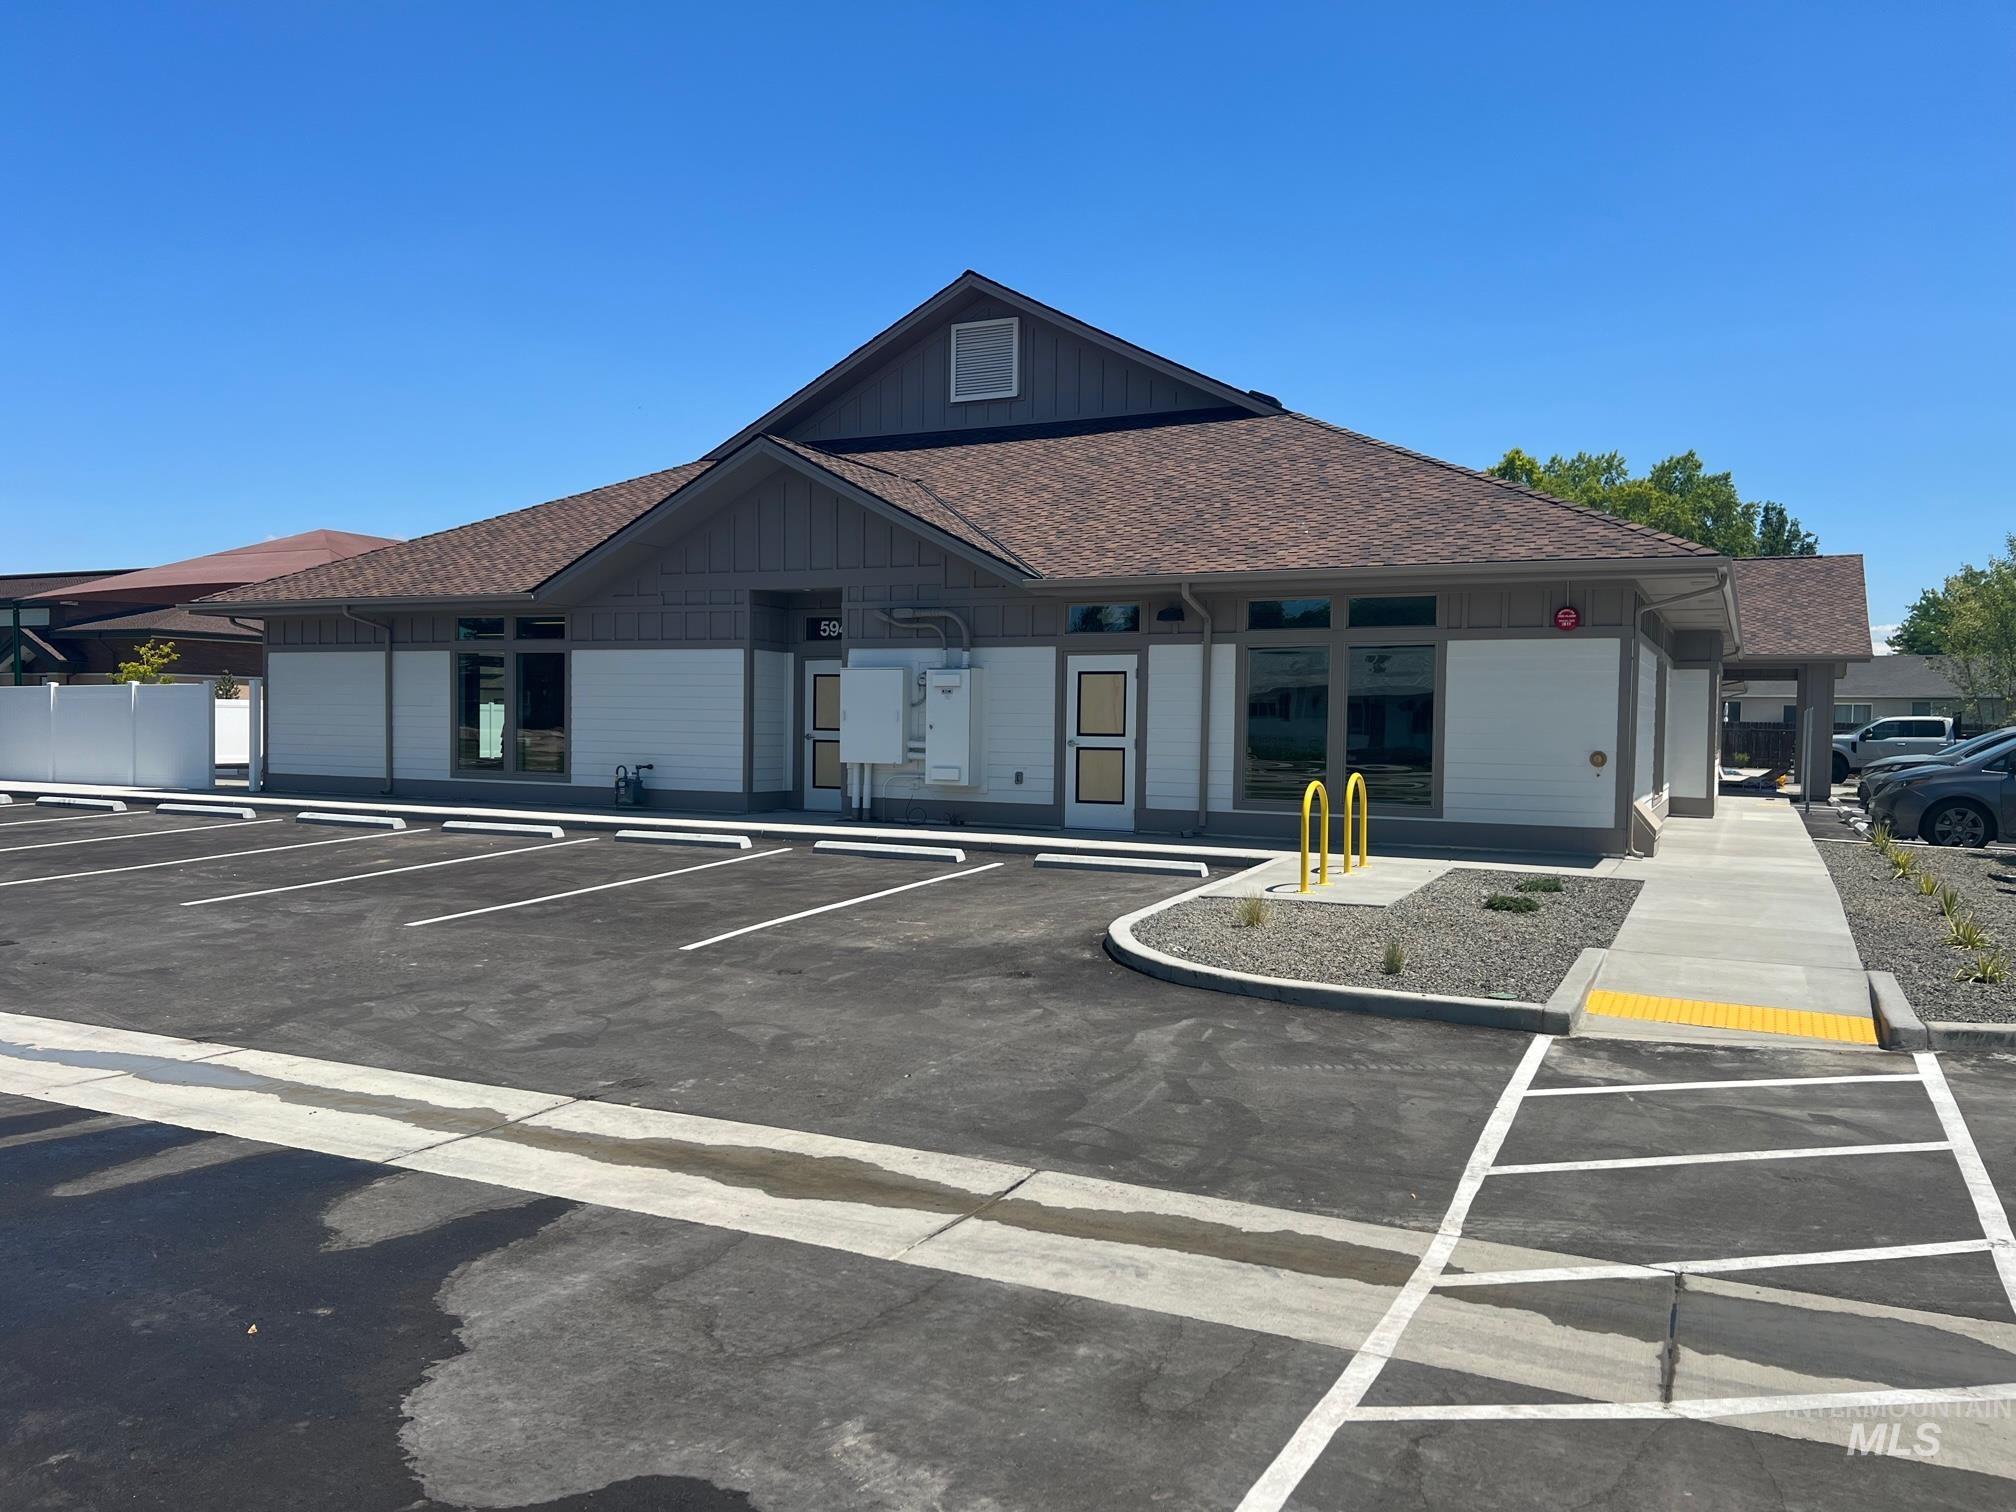 594 N Star Road, Star, Idaho 83669, Business/Commercial For Sale, Price $3,700,000,MLS 98877265